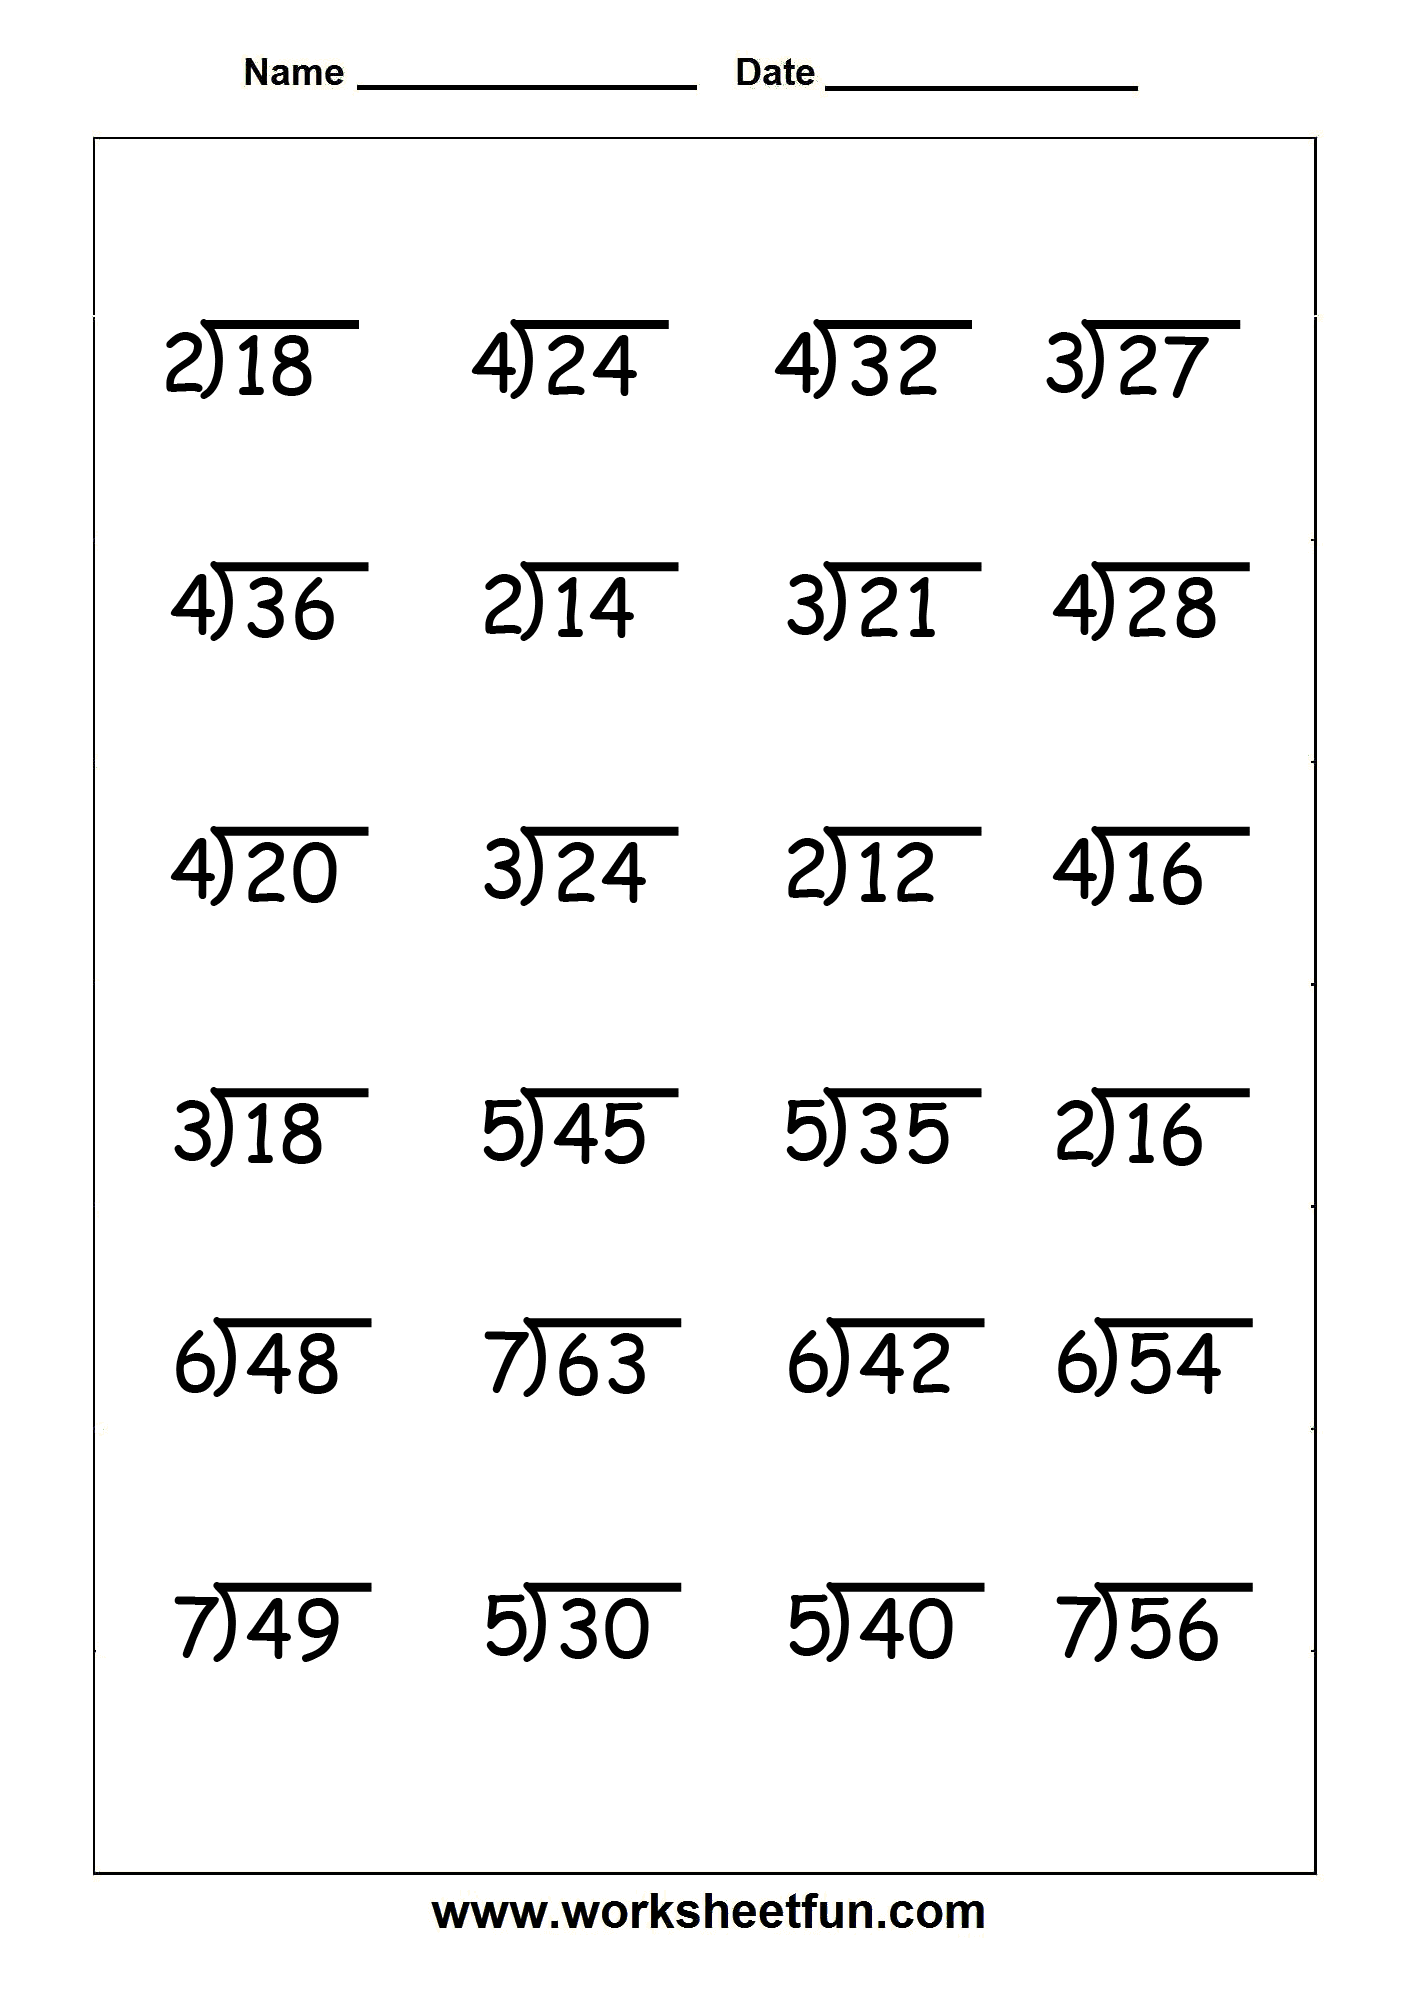 Division By 3 Worksheet